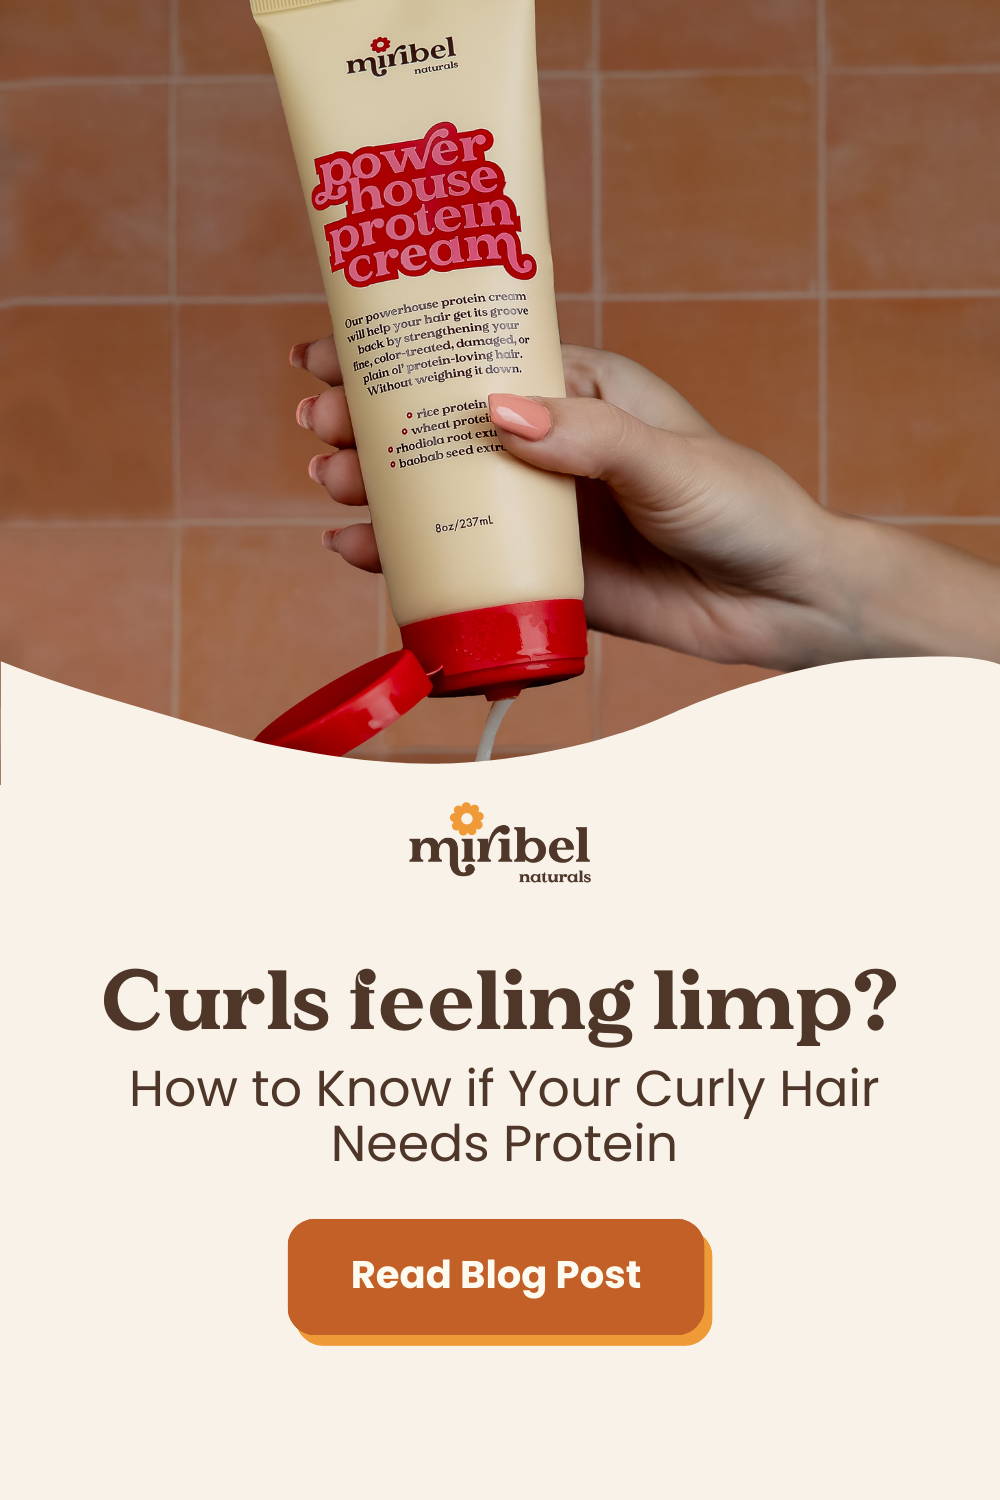 Picture of Miribel Naturals Powerhouse Protein Cream followed by text Curls Feeling Limp? How to tell if your curly hair needs protein.